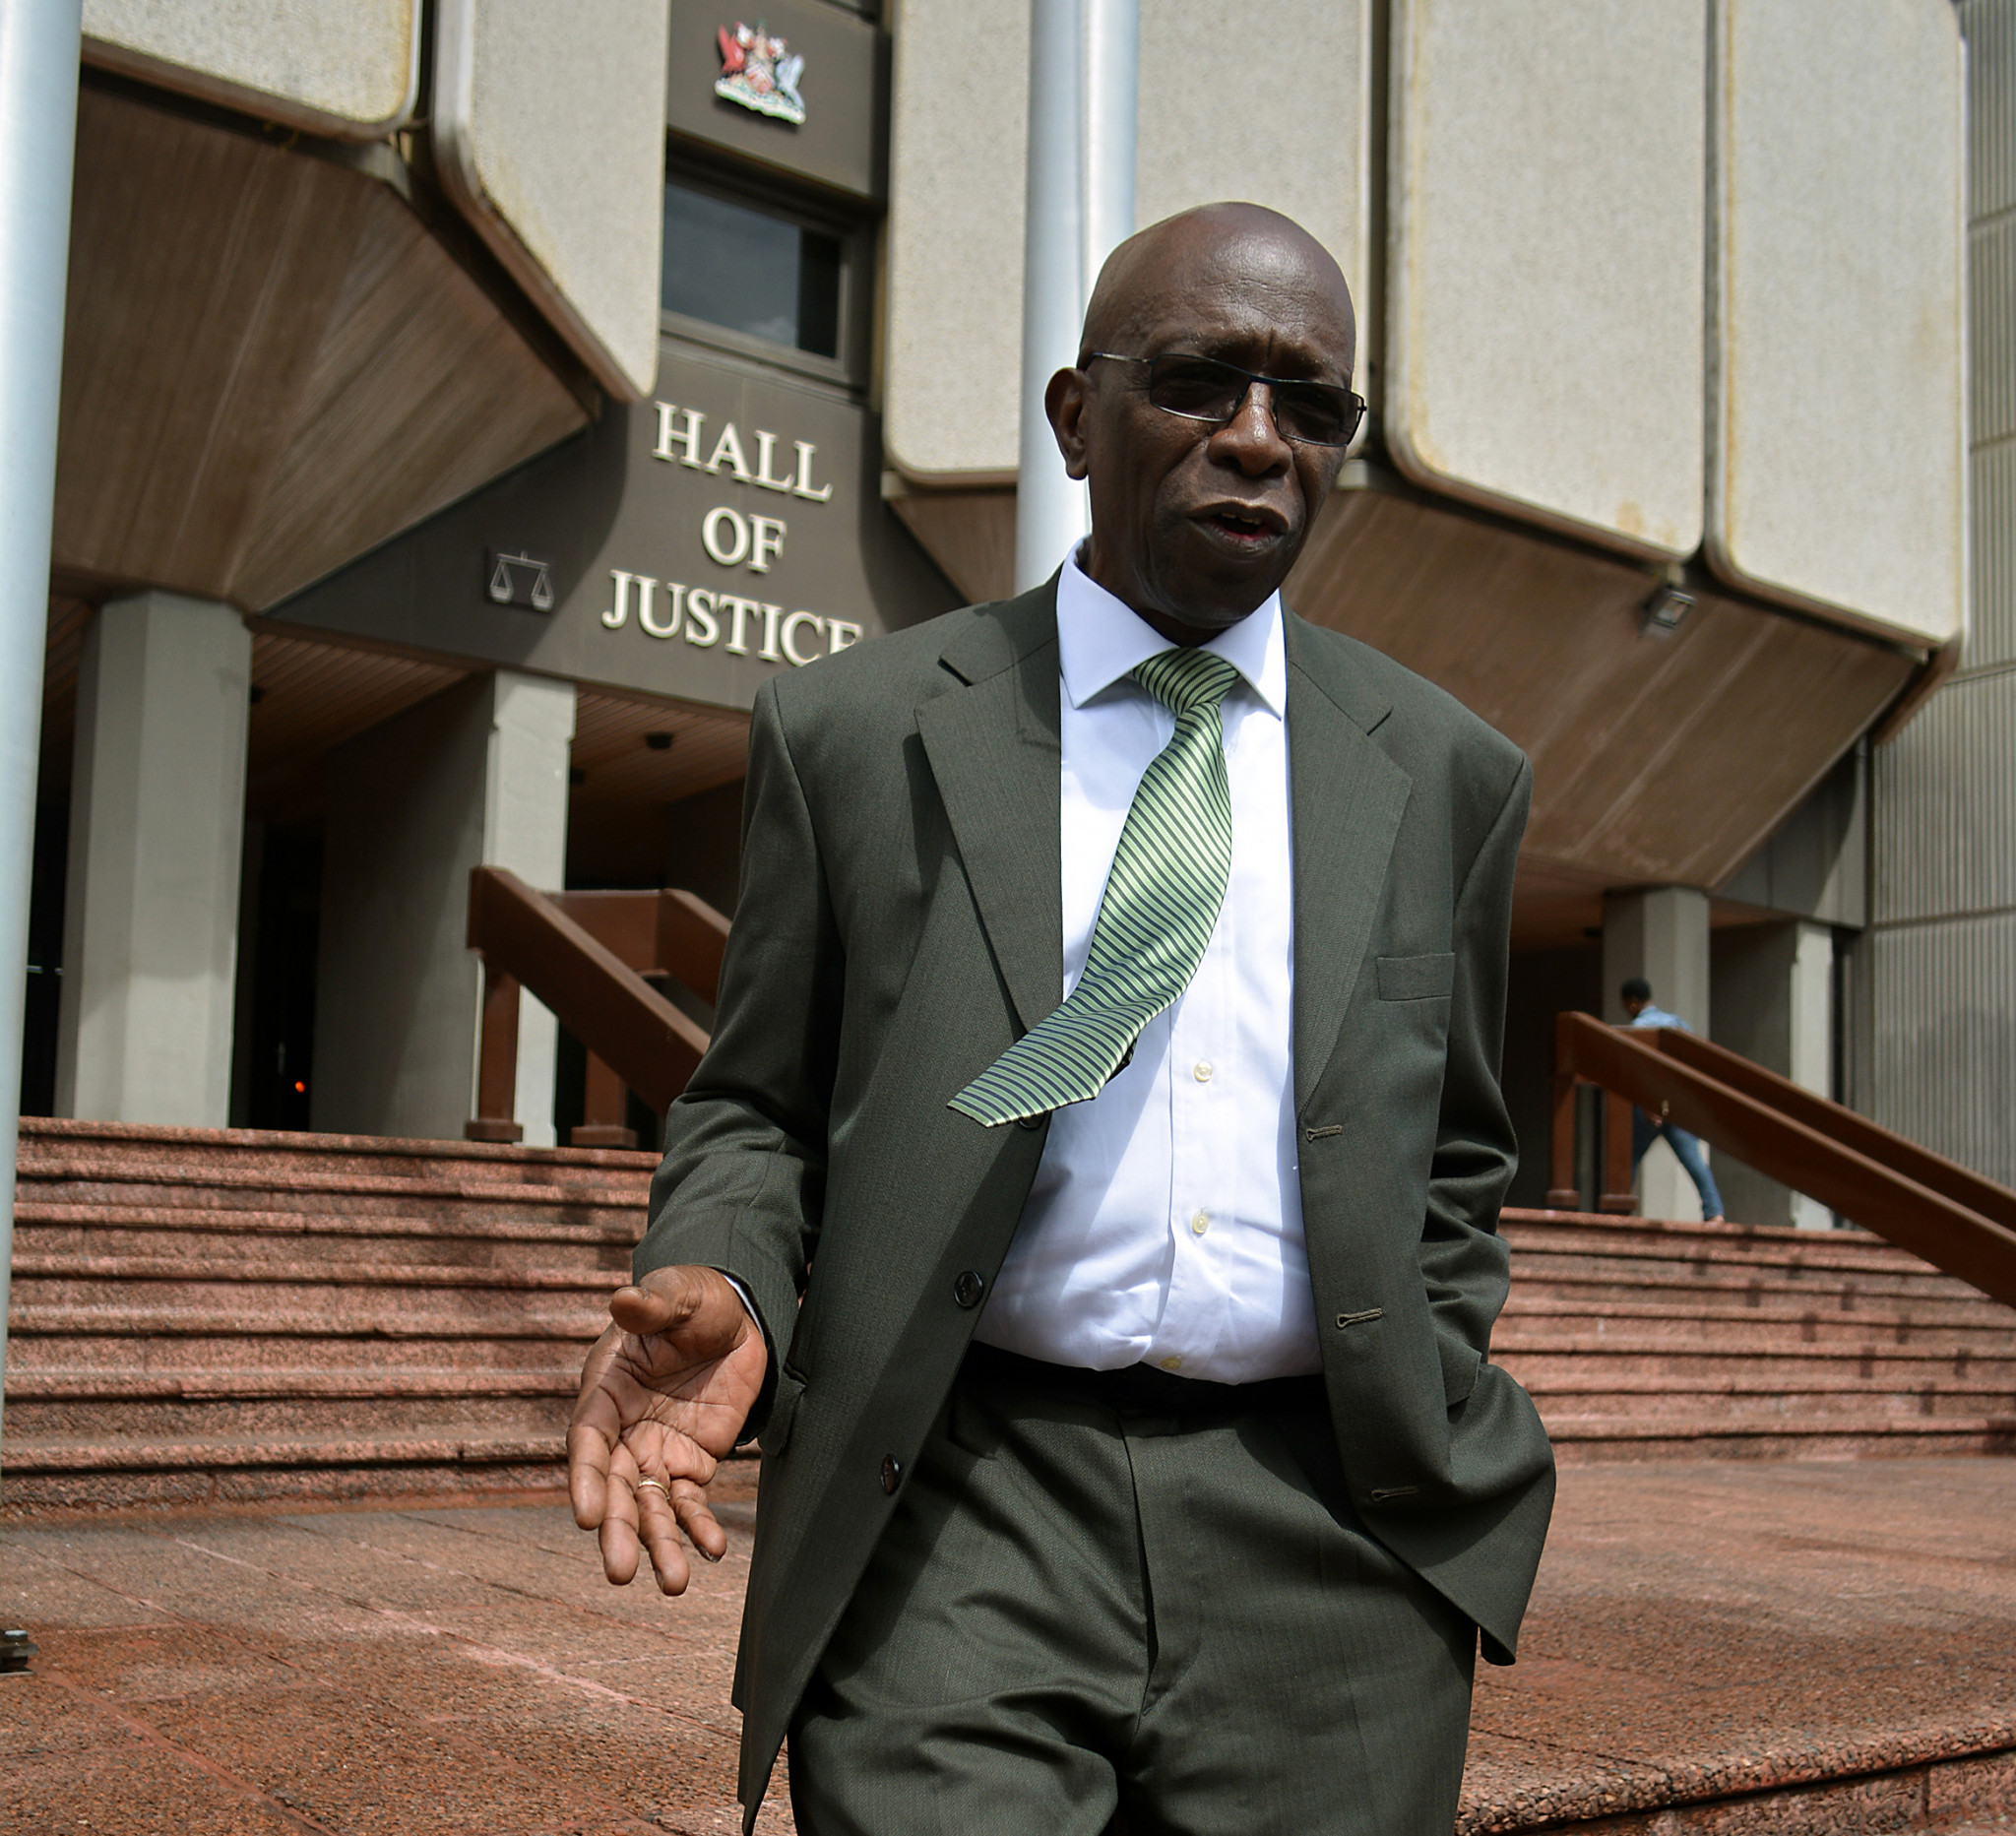 Jack Warner has rarely been far from controversy ©Getty Images